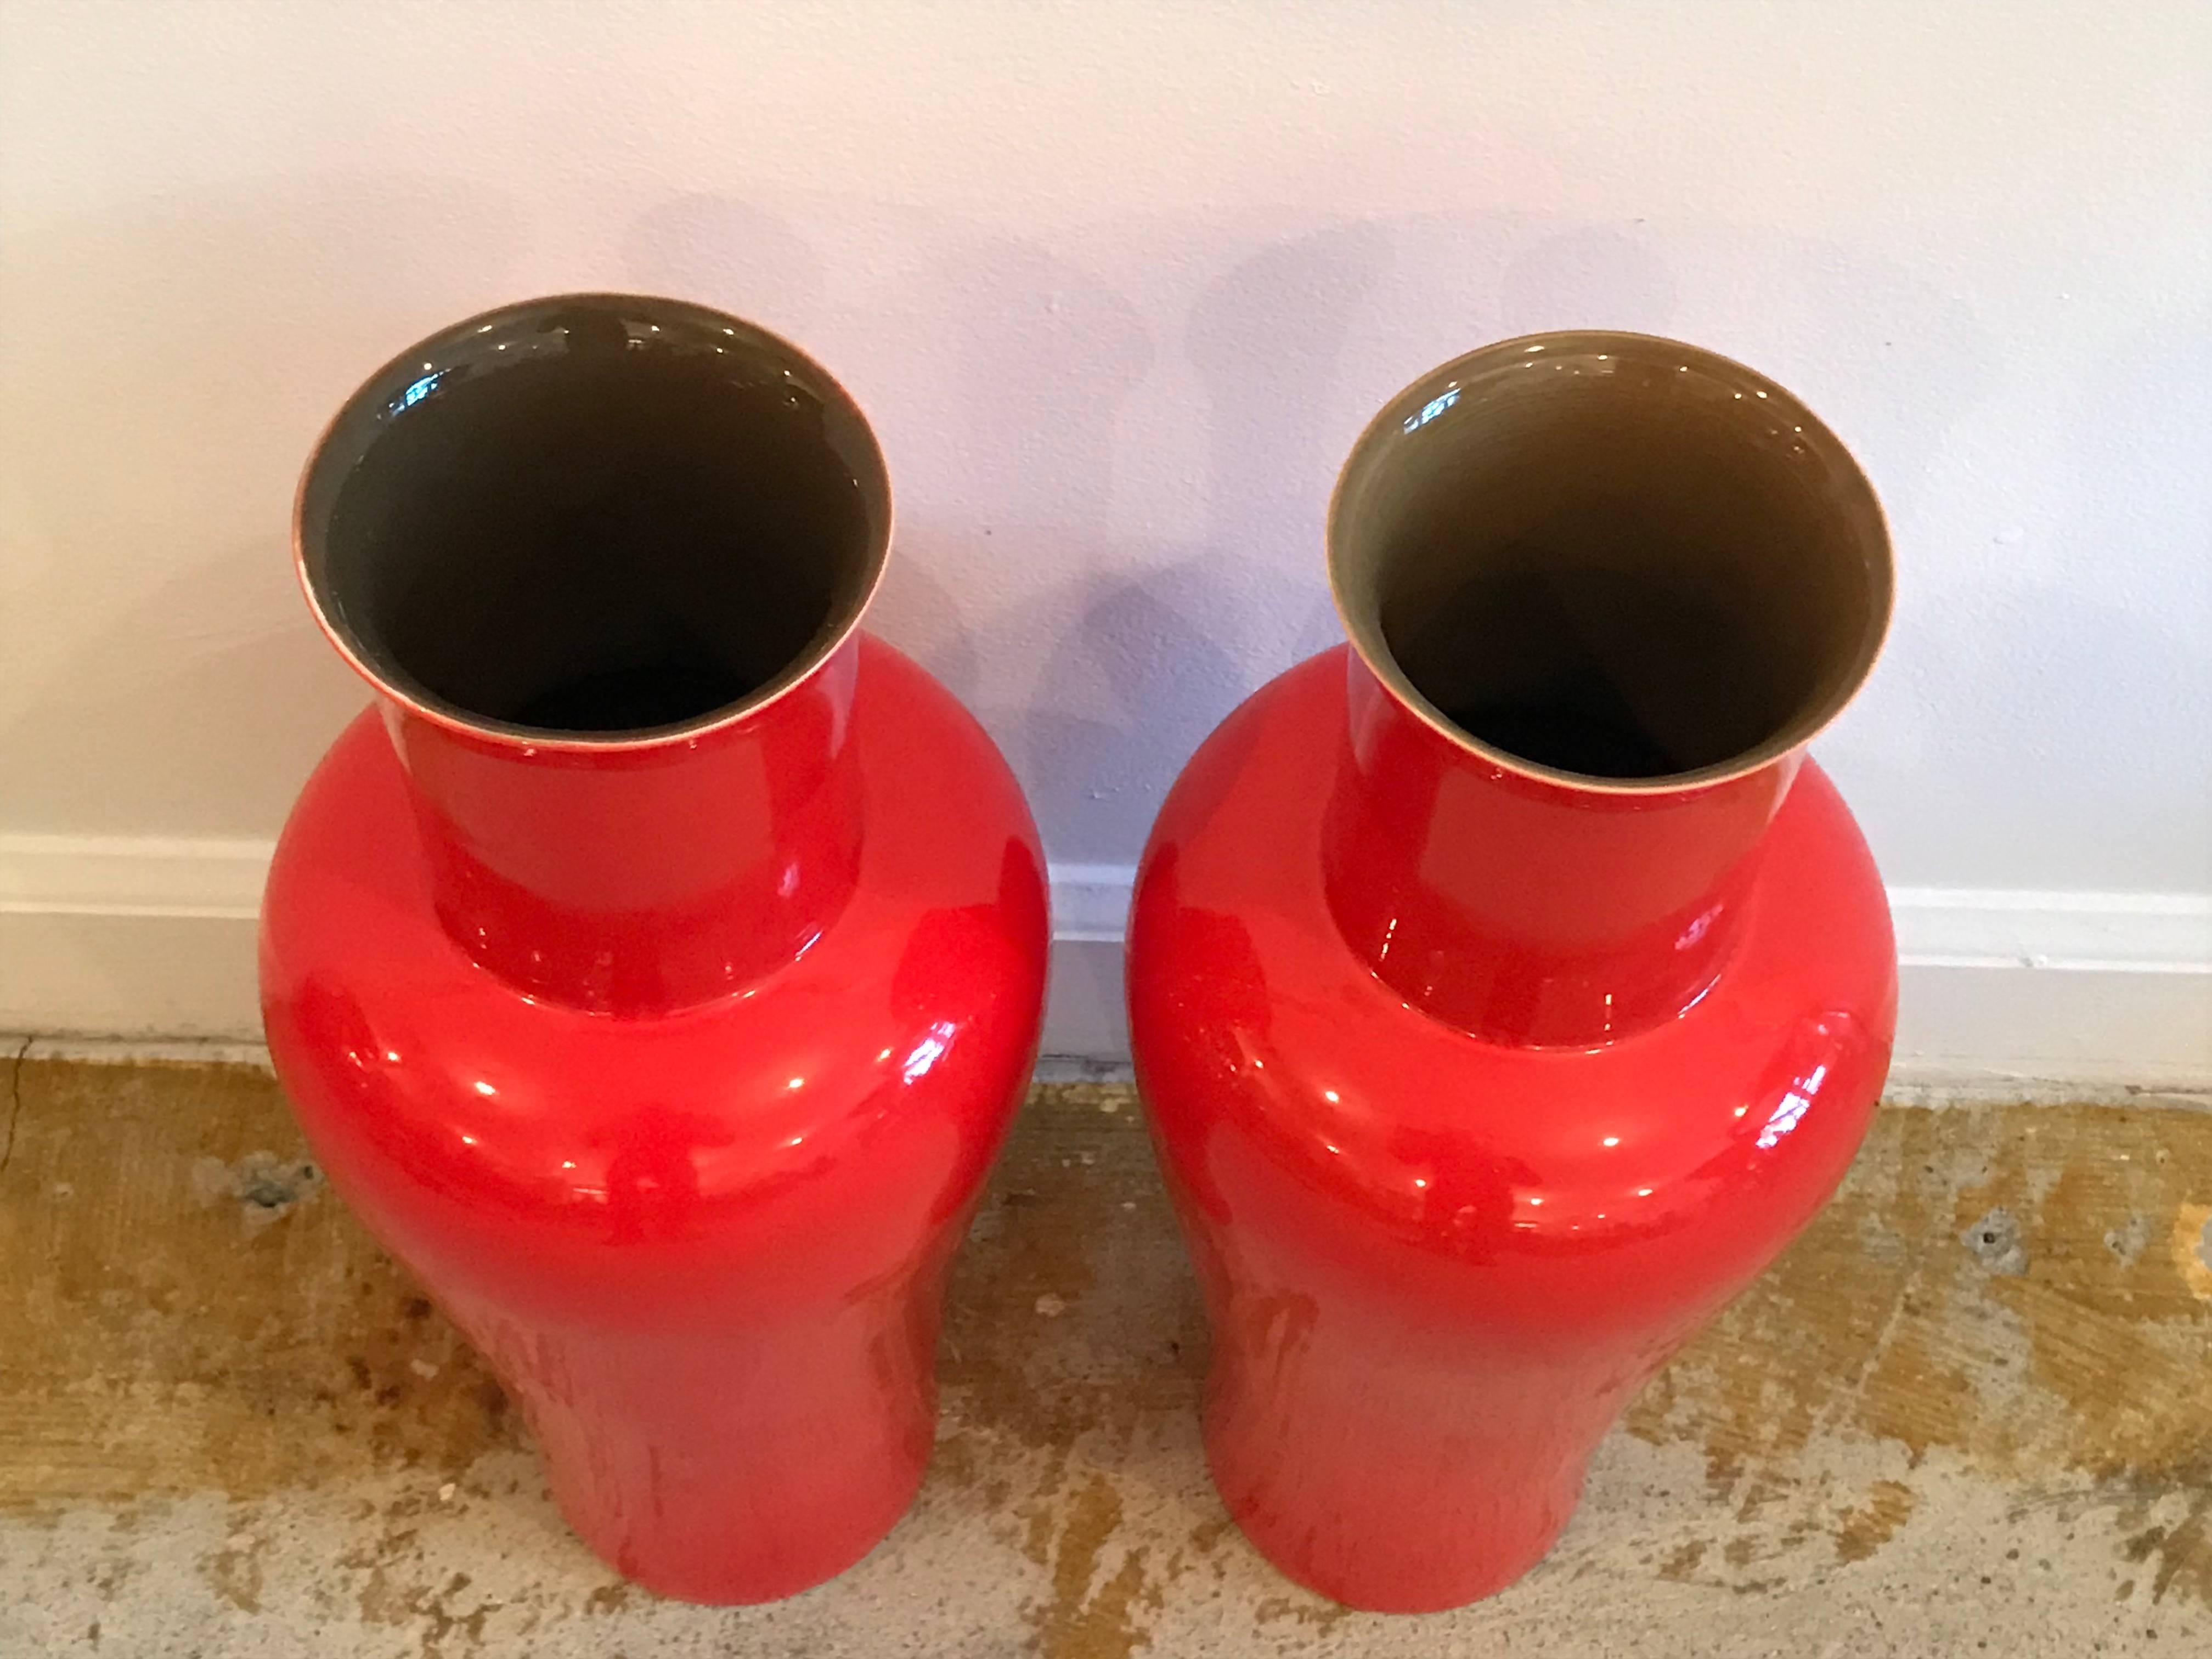 Stunning Pair of handcrafted modern porcelain vases by Artist Bo Jai for Middle Kingdom. 15 inches x 6 inch. Vibrant red with contrasting rich brown interior. The vases are kiln fired in Jingdezhen China. Each piece signed by the artist. Exceptional